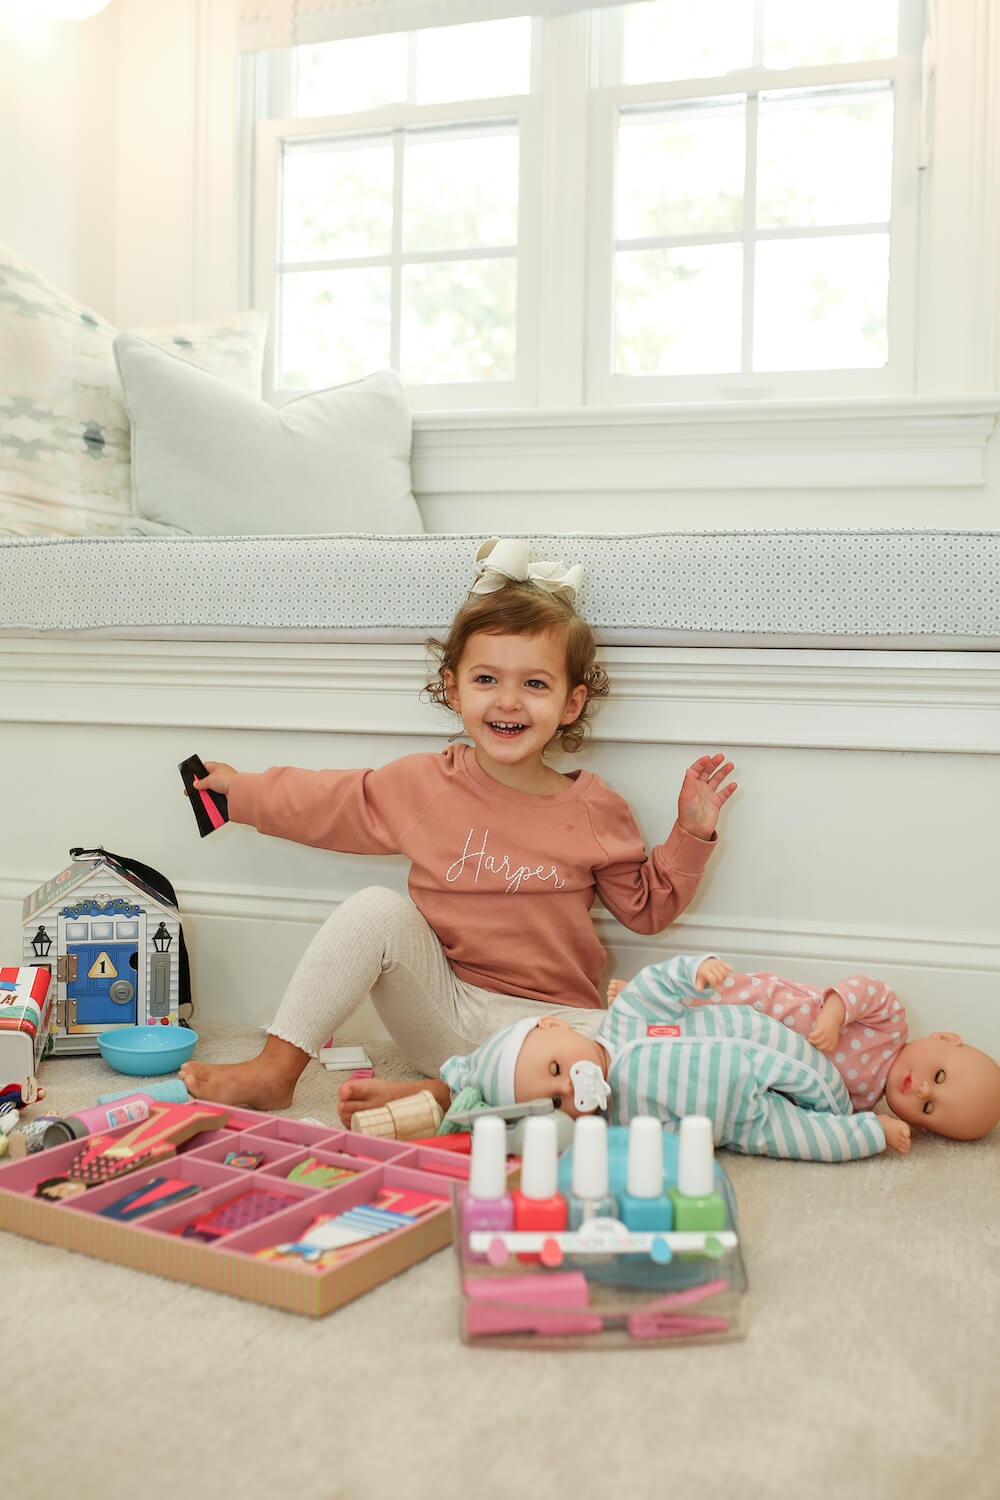 little girl playing with melissa and doug toys on the floor with mauve sweatshirt with her name on it